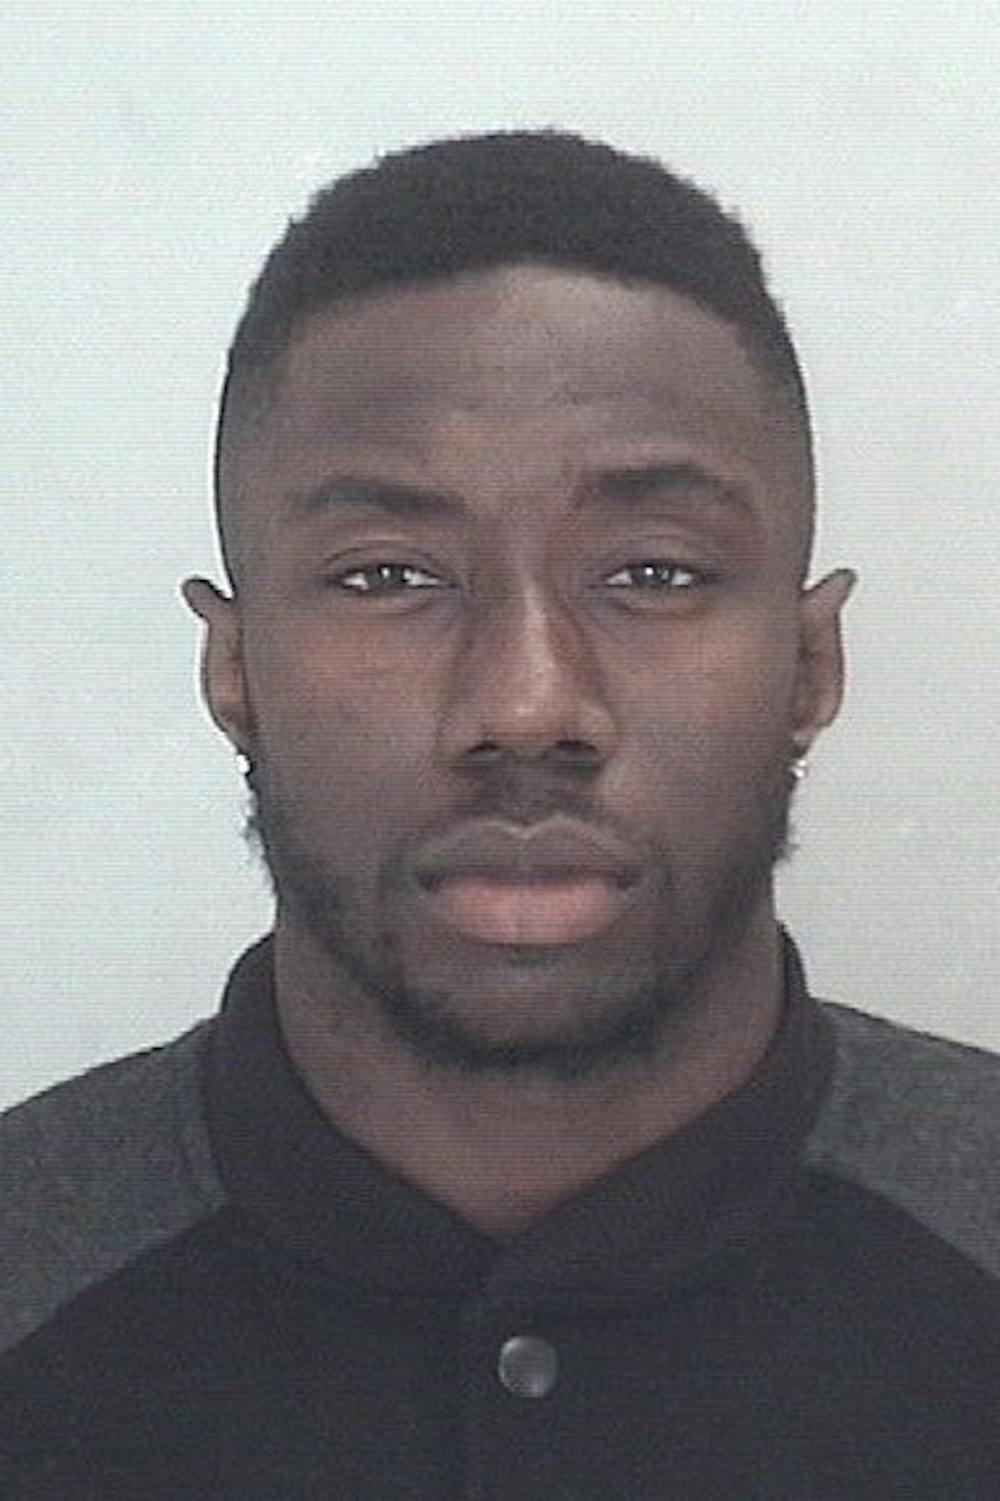 North Carolina running back Romar Morris was arrested early Sunday morning for driving while impaired.